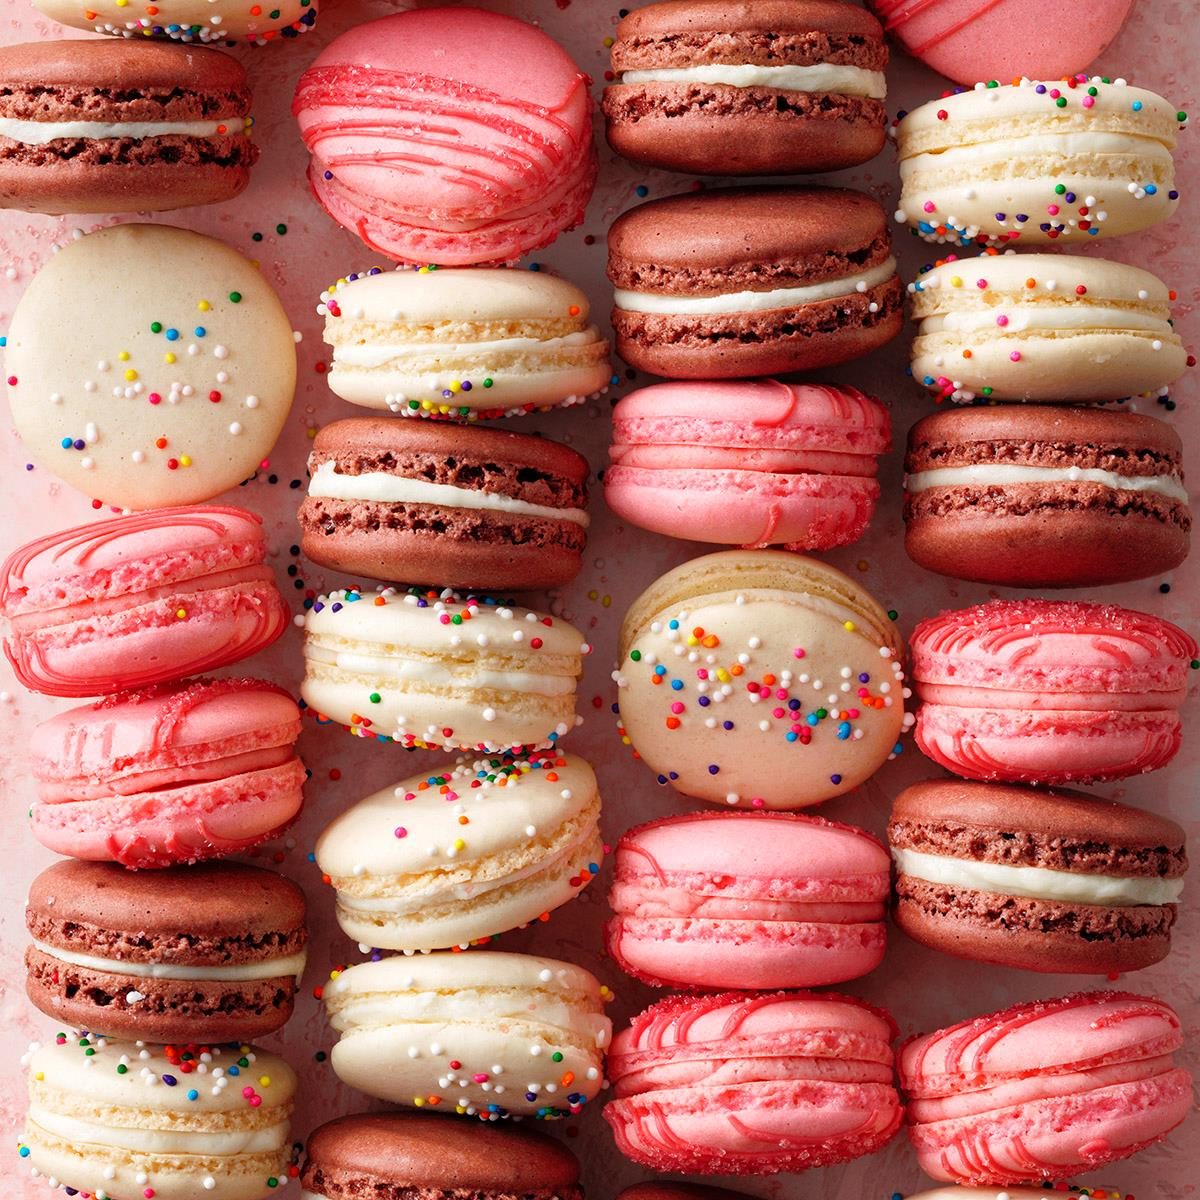 French Macarons Exps Tohfm23 226955 P2 Md 09 16 4b